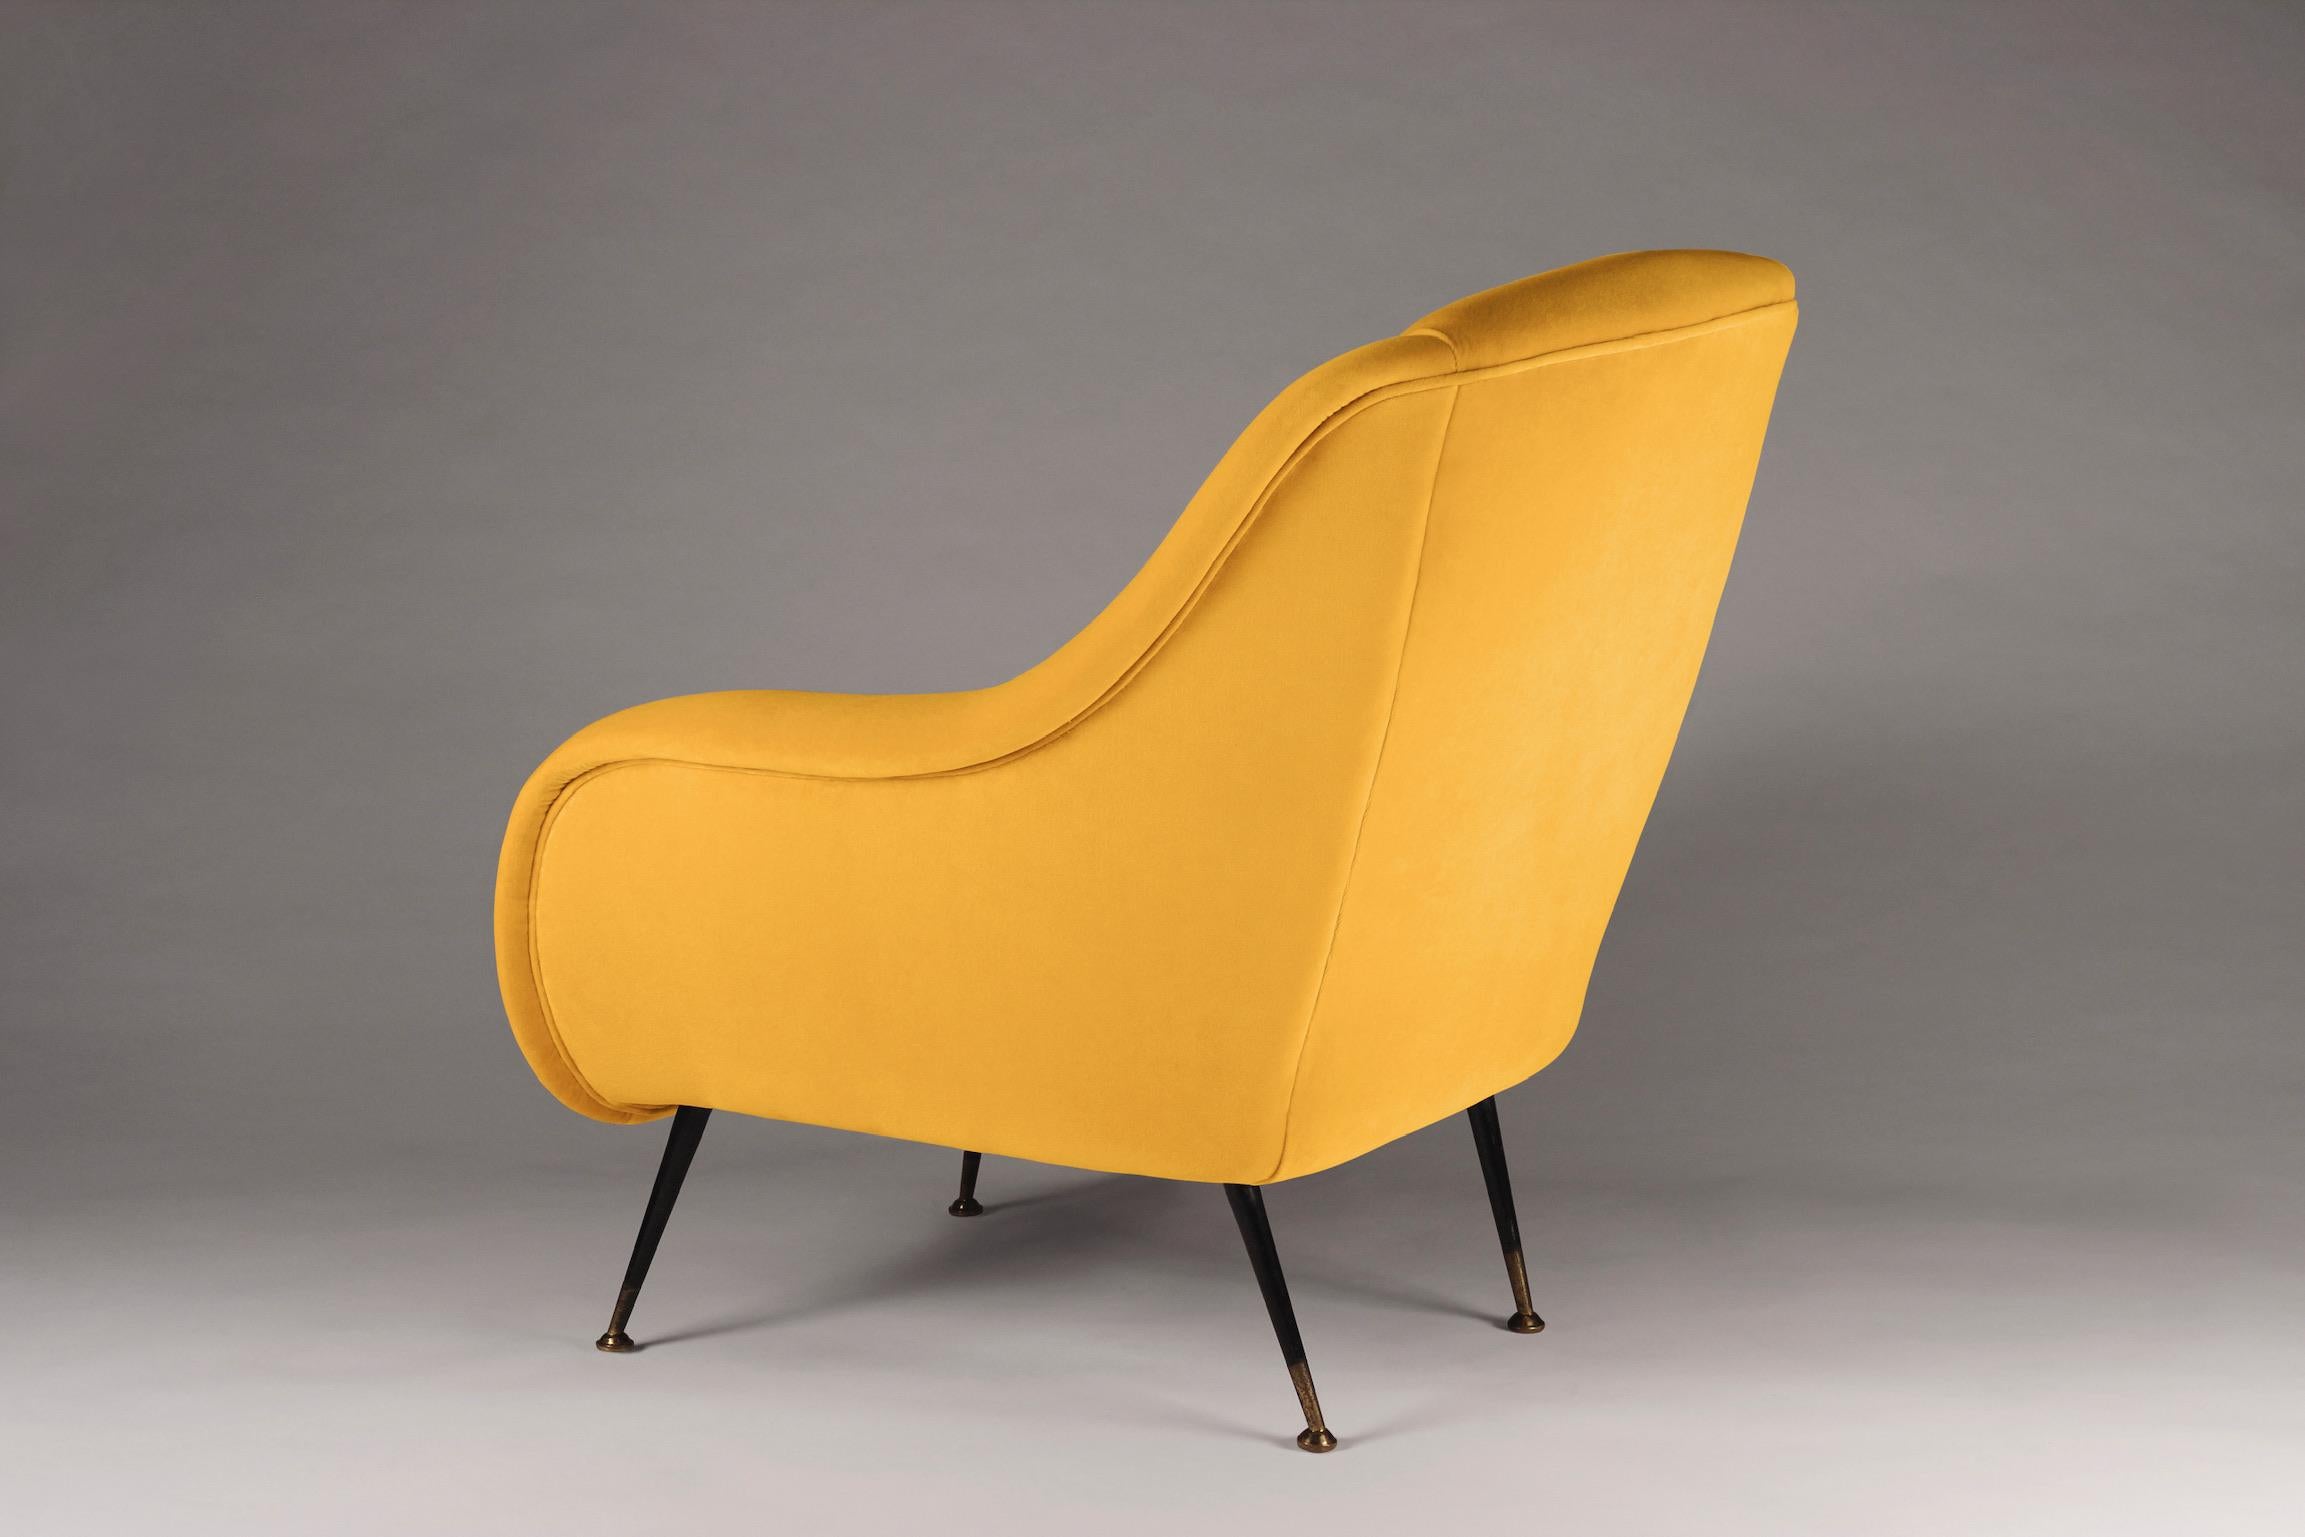 Pair of Mid-Century Modern Style Italian Lounge Chairs in Yellow In New Condition For Sale In London, GB